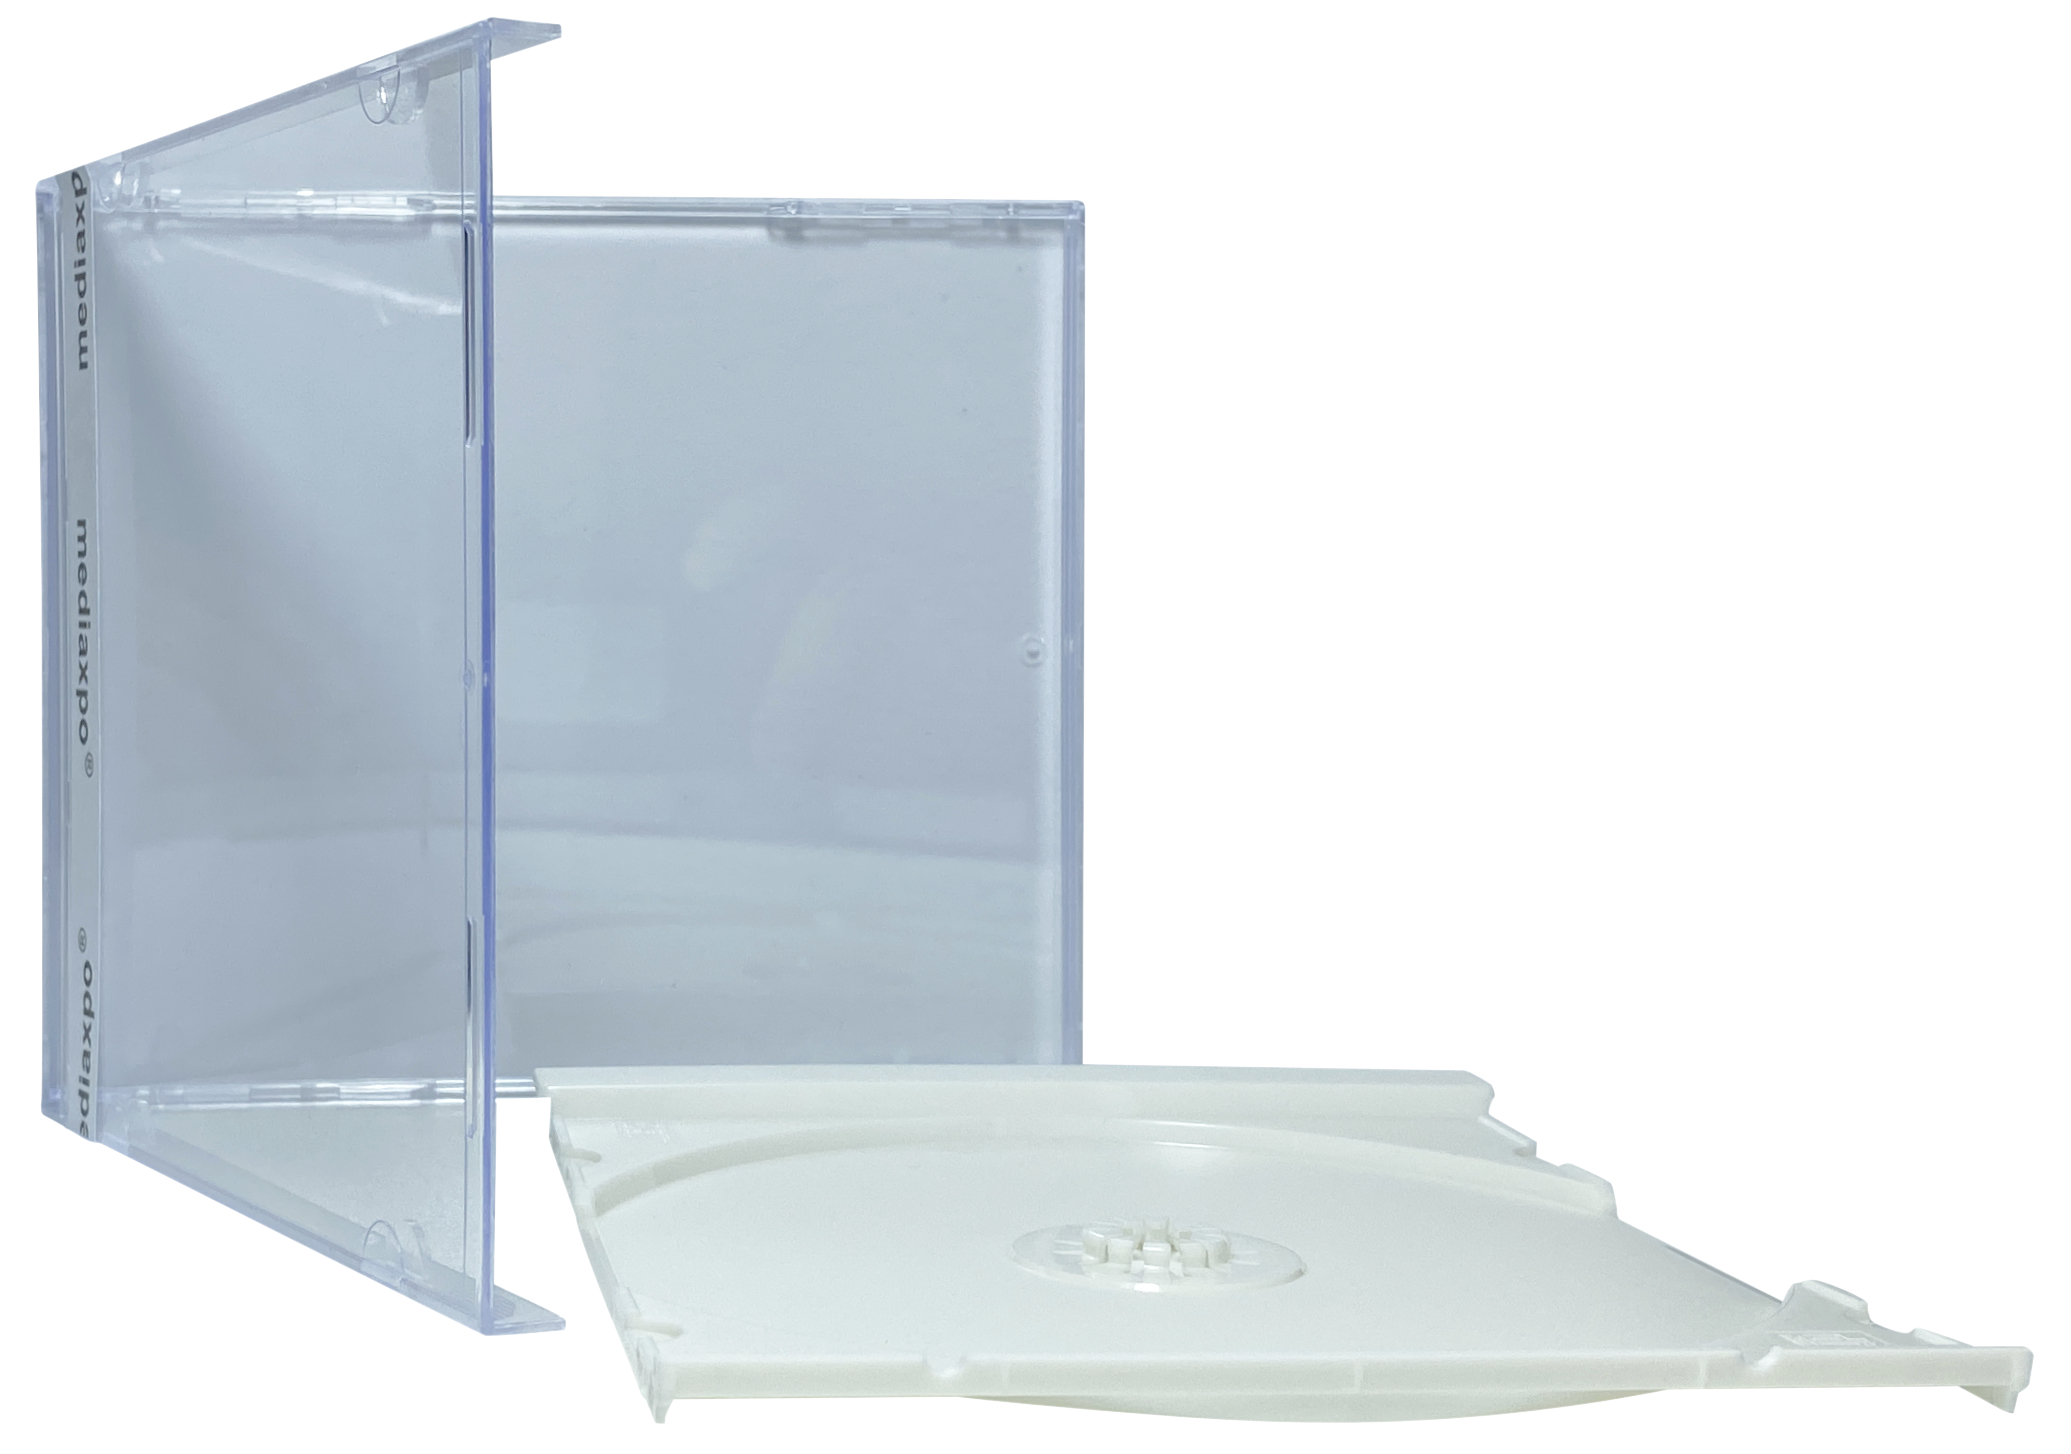 Image of ID 1214262413 200 STANDARD White Color CD Jewel Case (Unassembled)